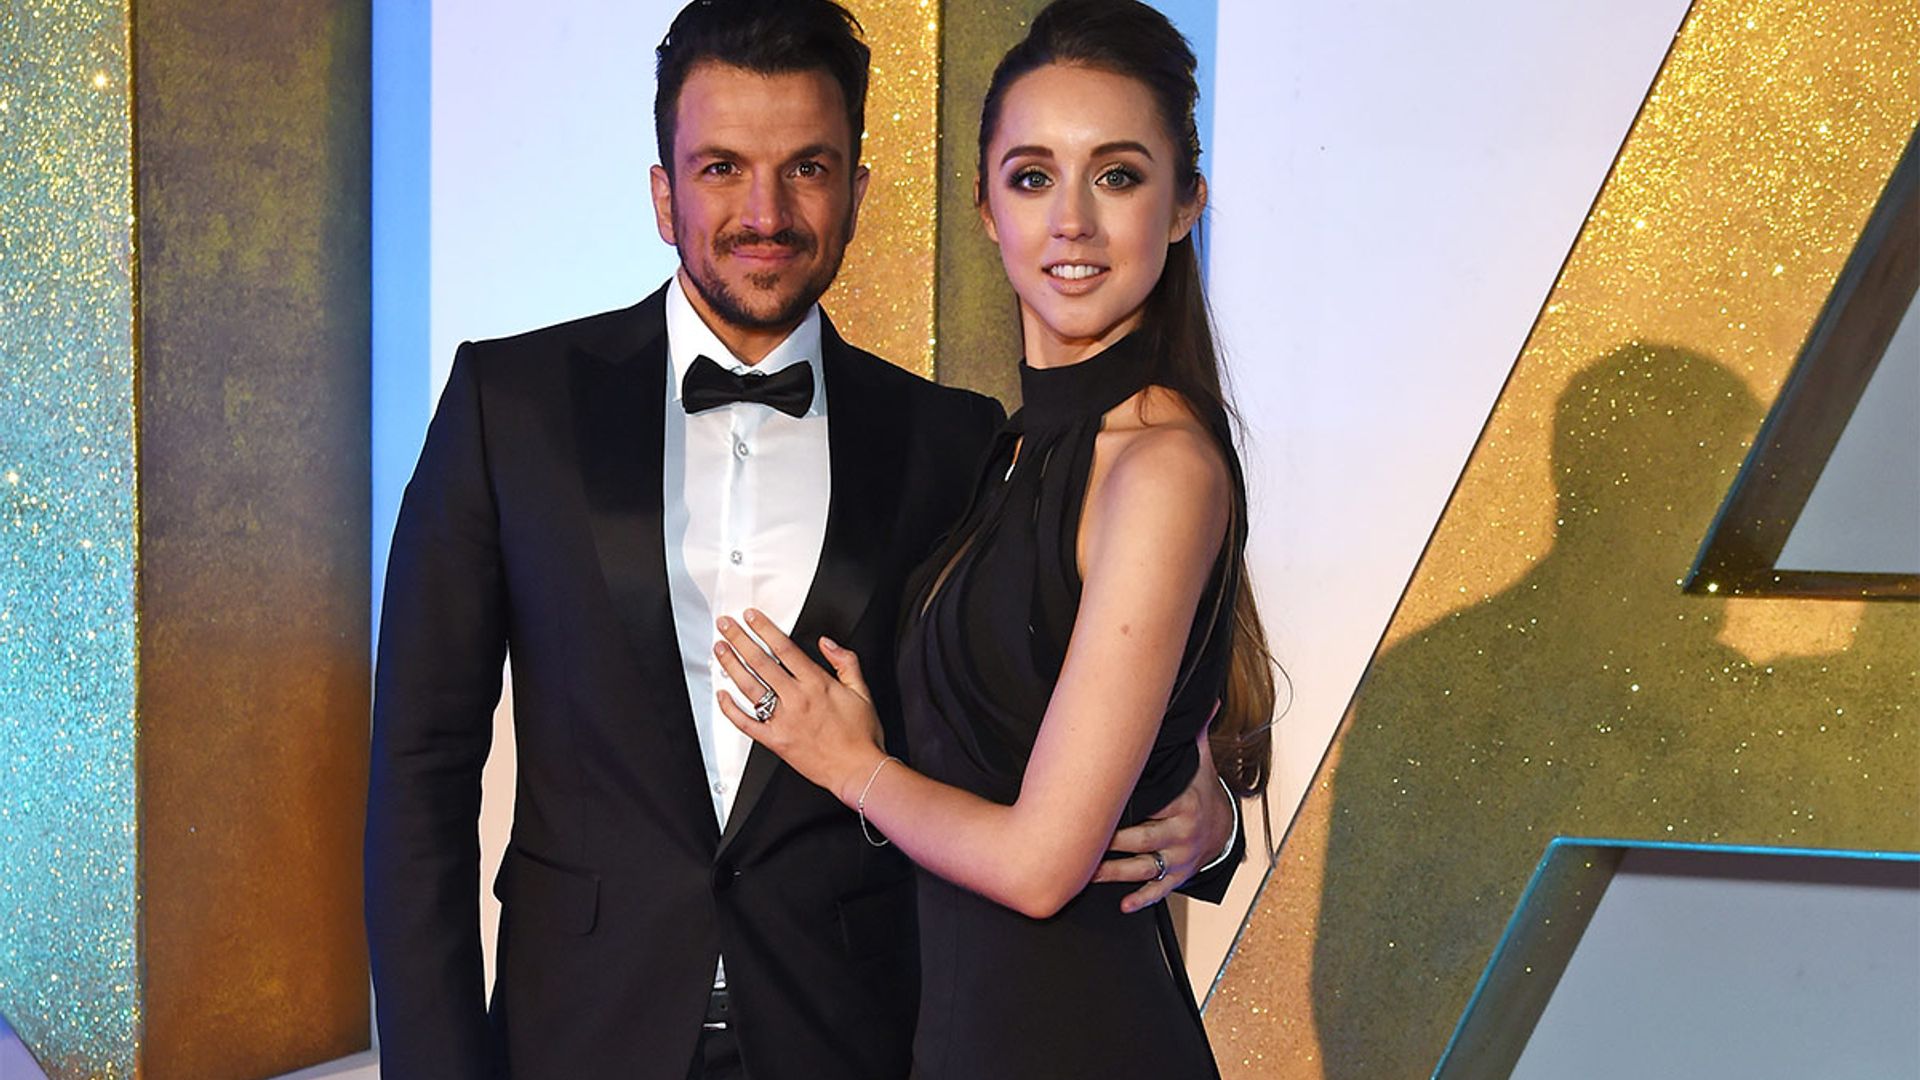 Peter Andre and wife Emily cause a stir with candid new photo